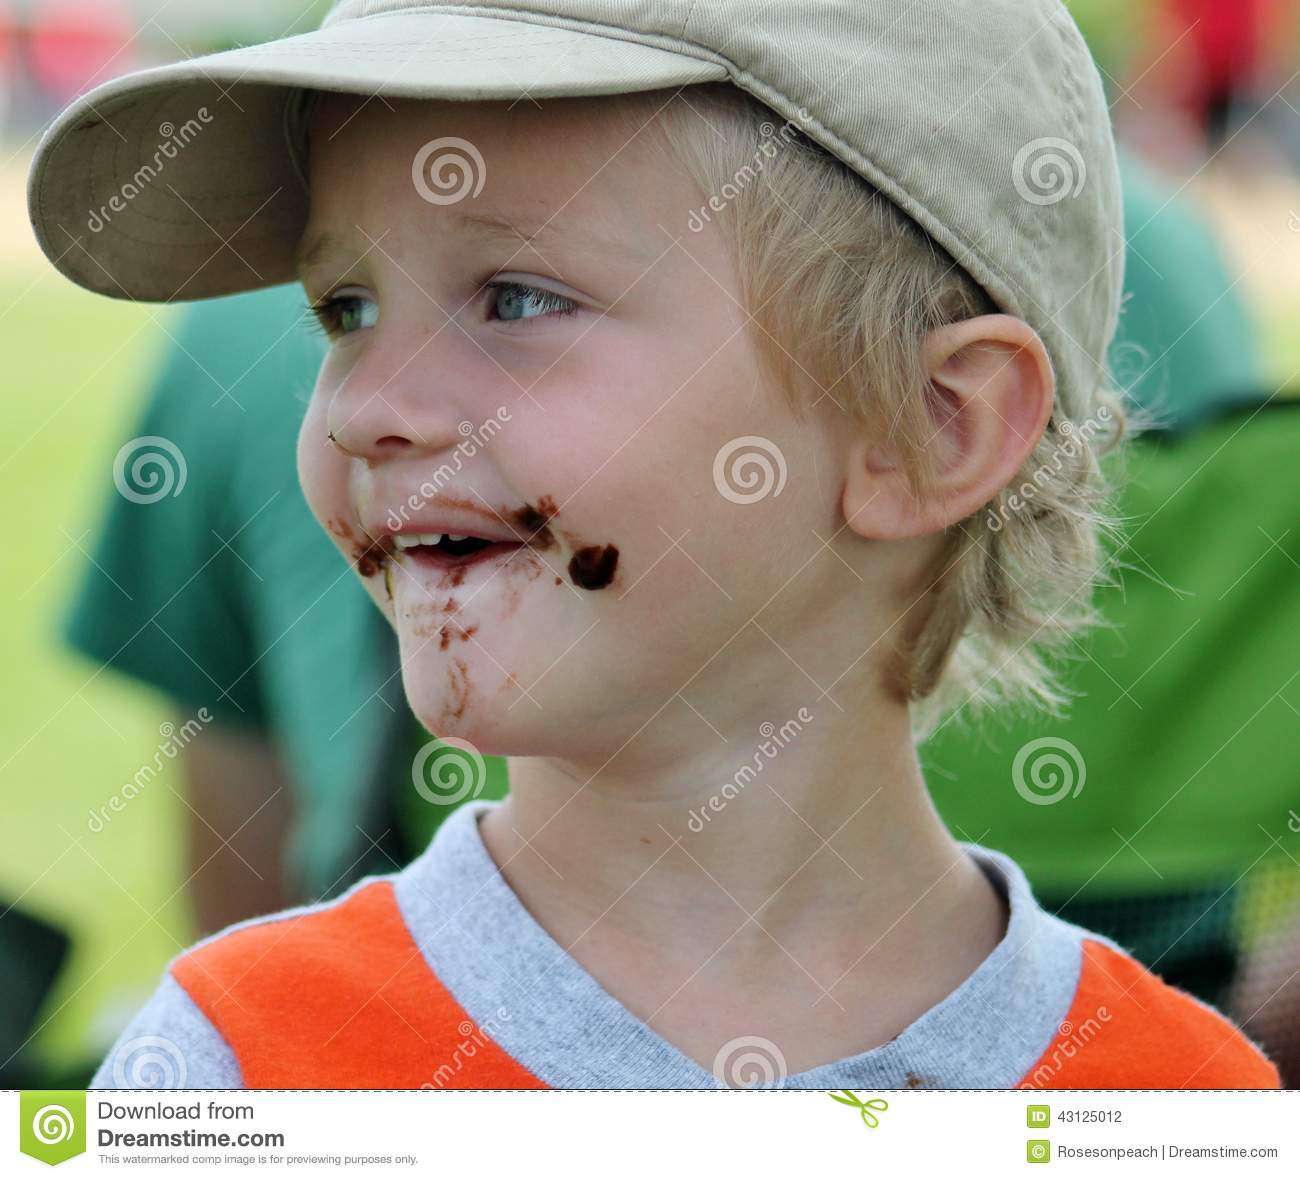 Chocolate Messy Faced Toddler Boy Stock Photo   Image  43125012